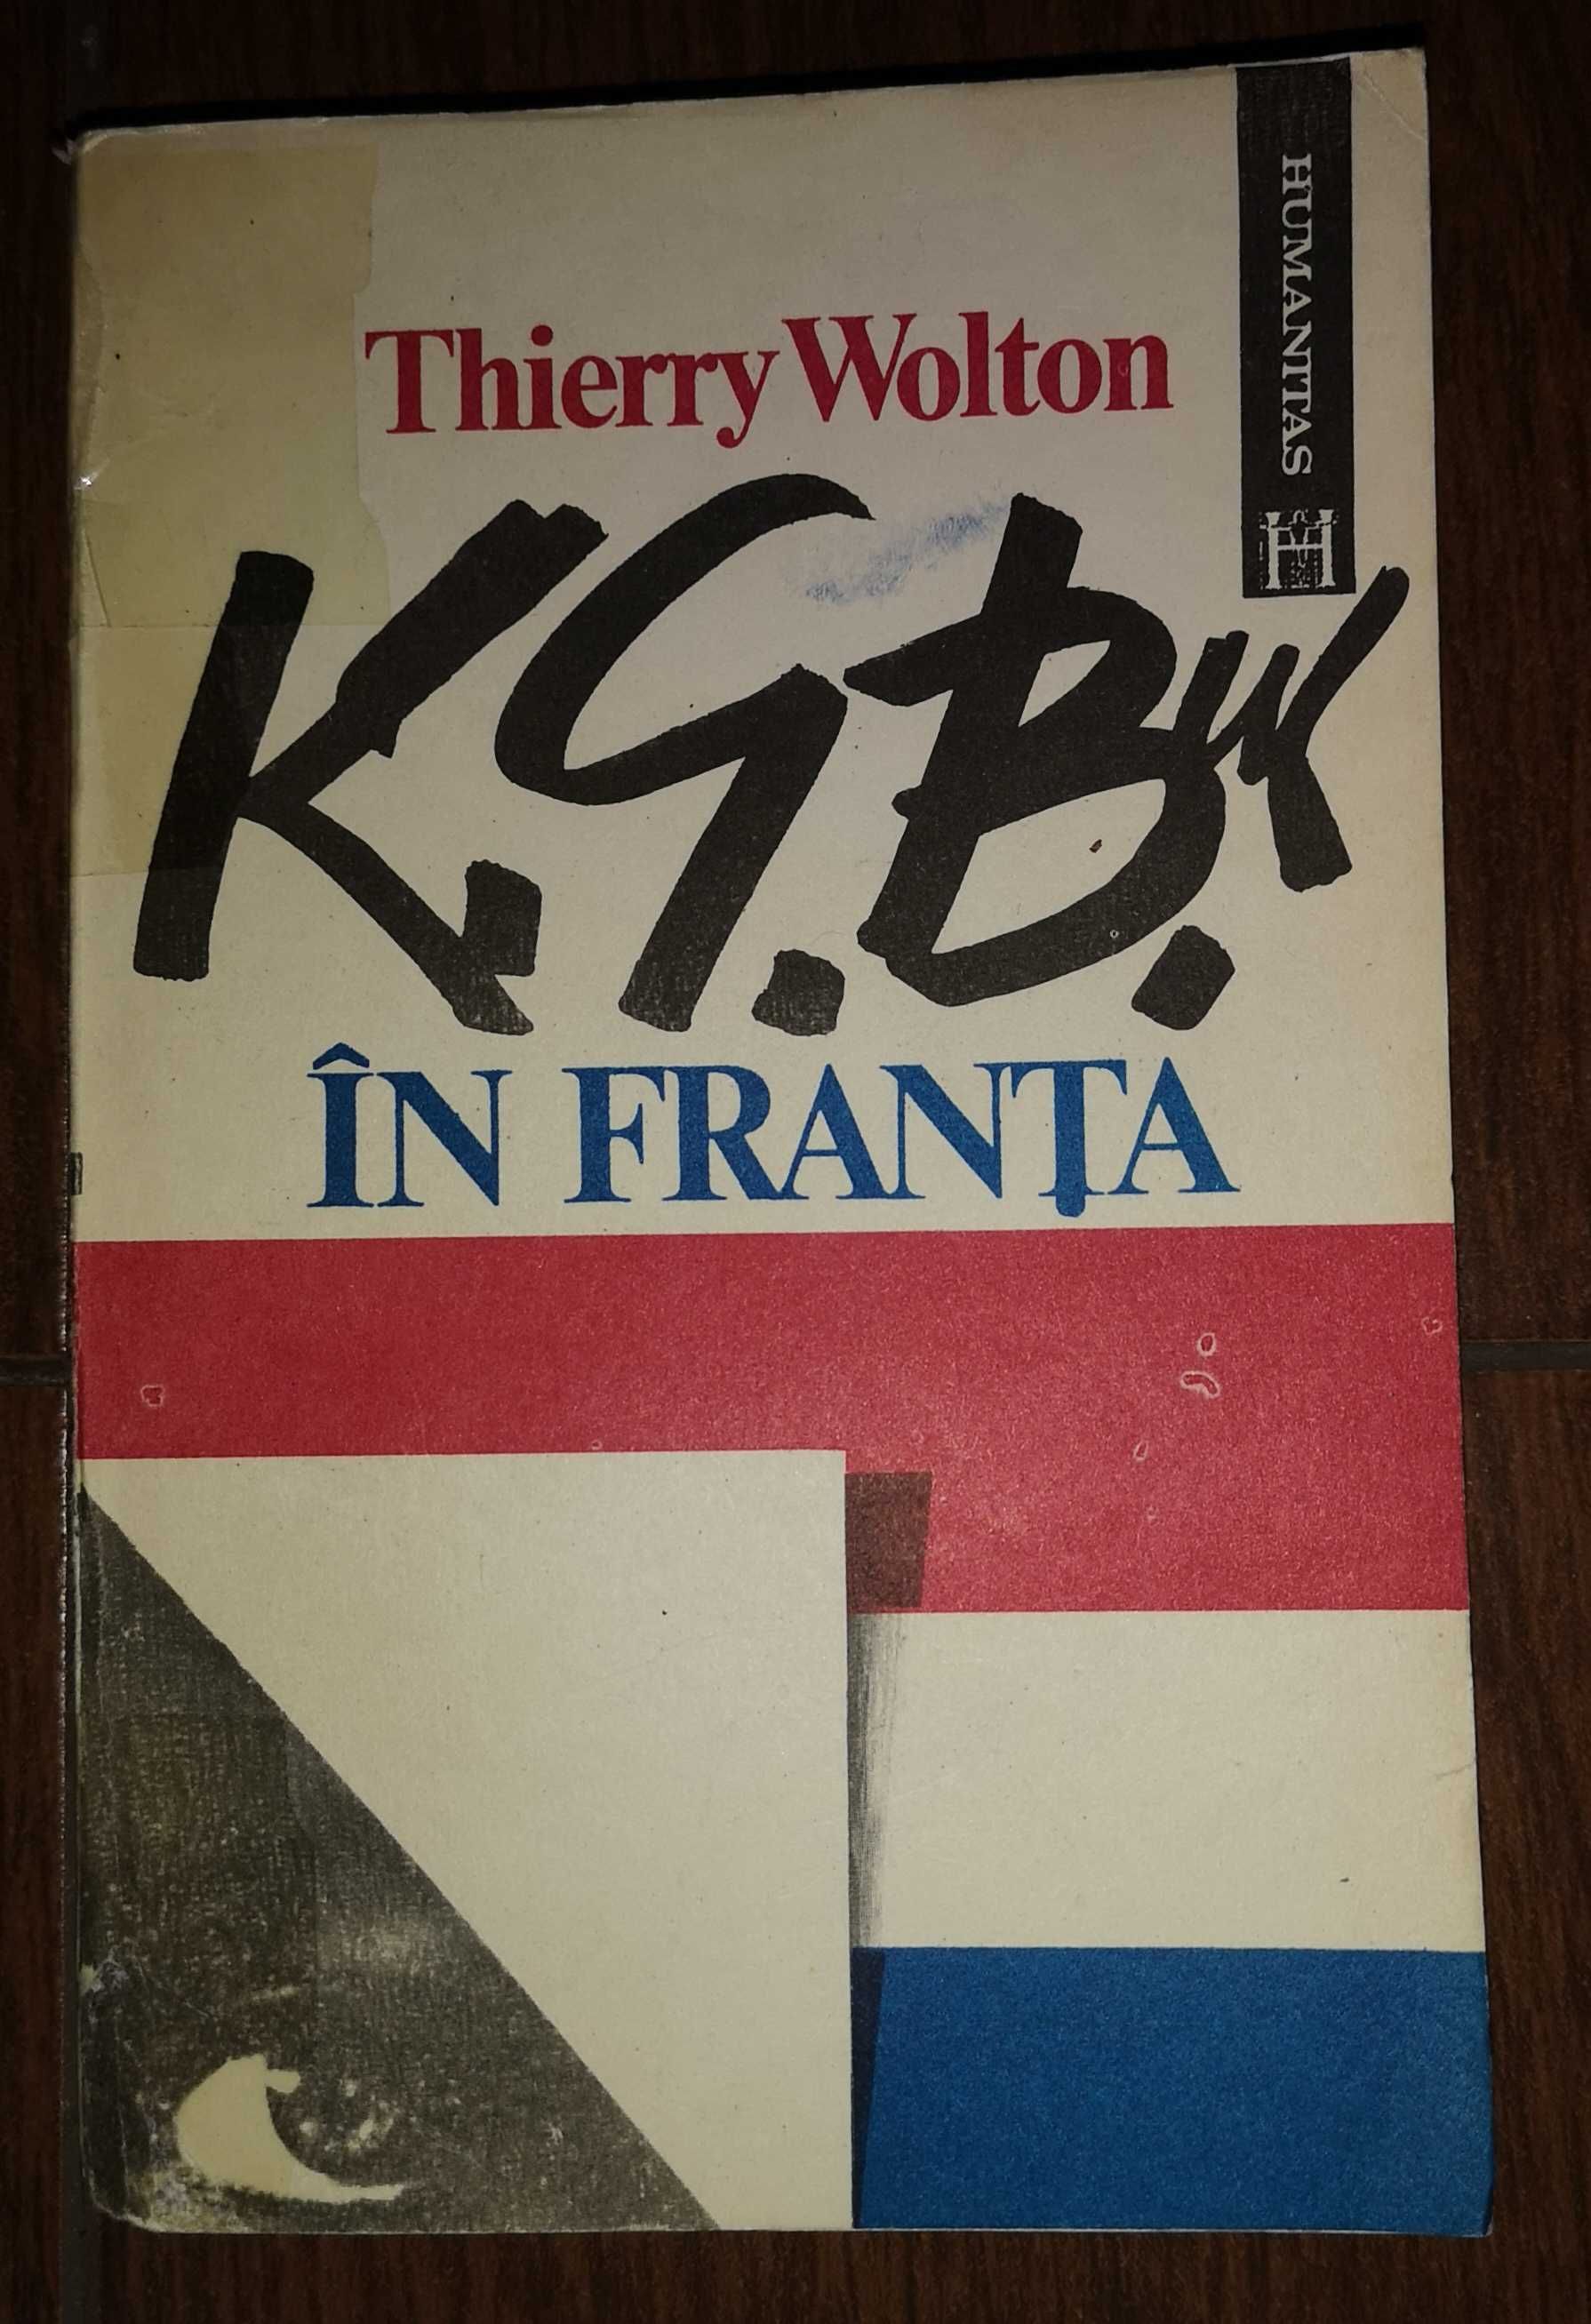 Thierry Wolton - K. G. B. in Franta